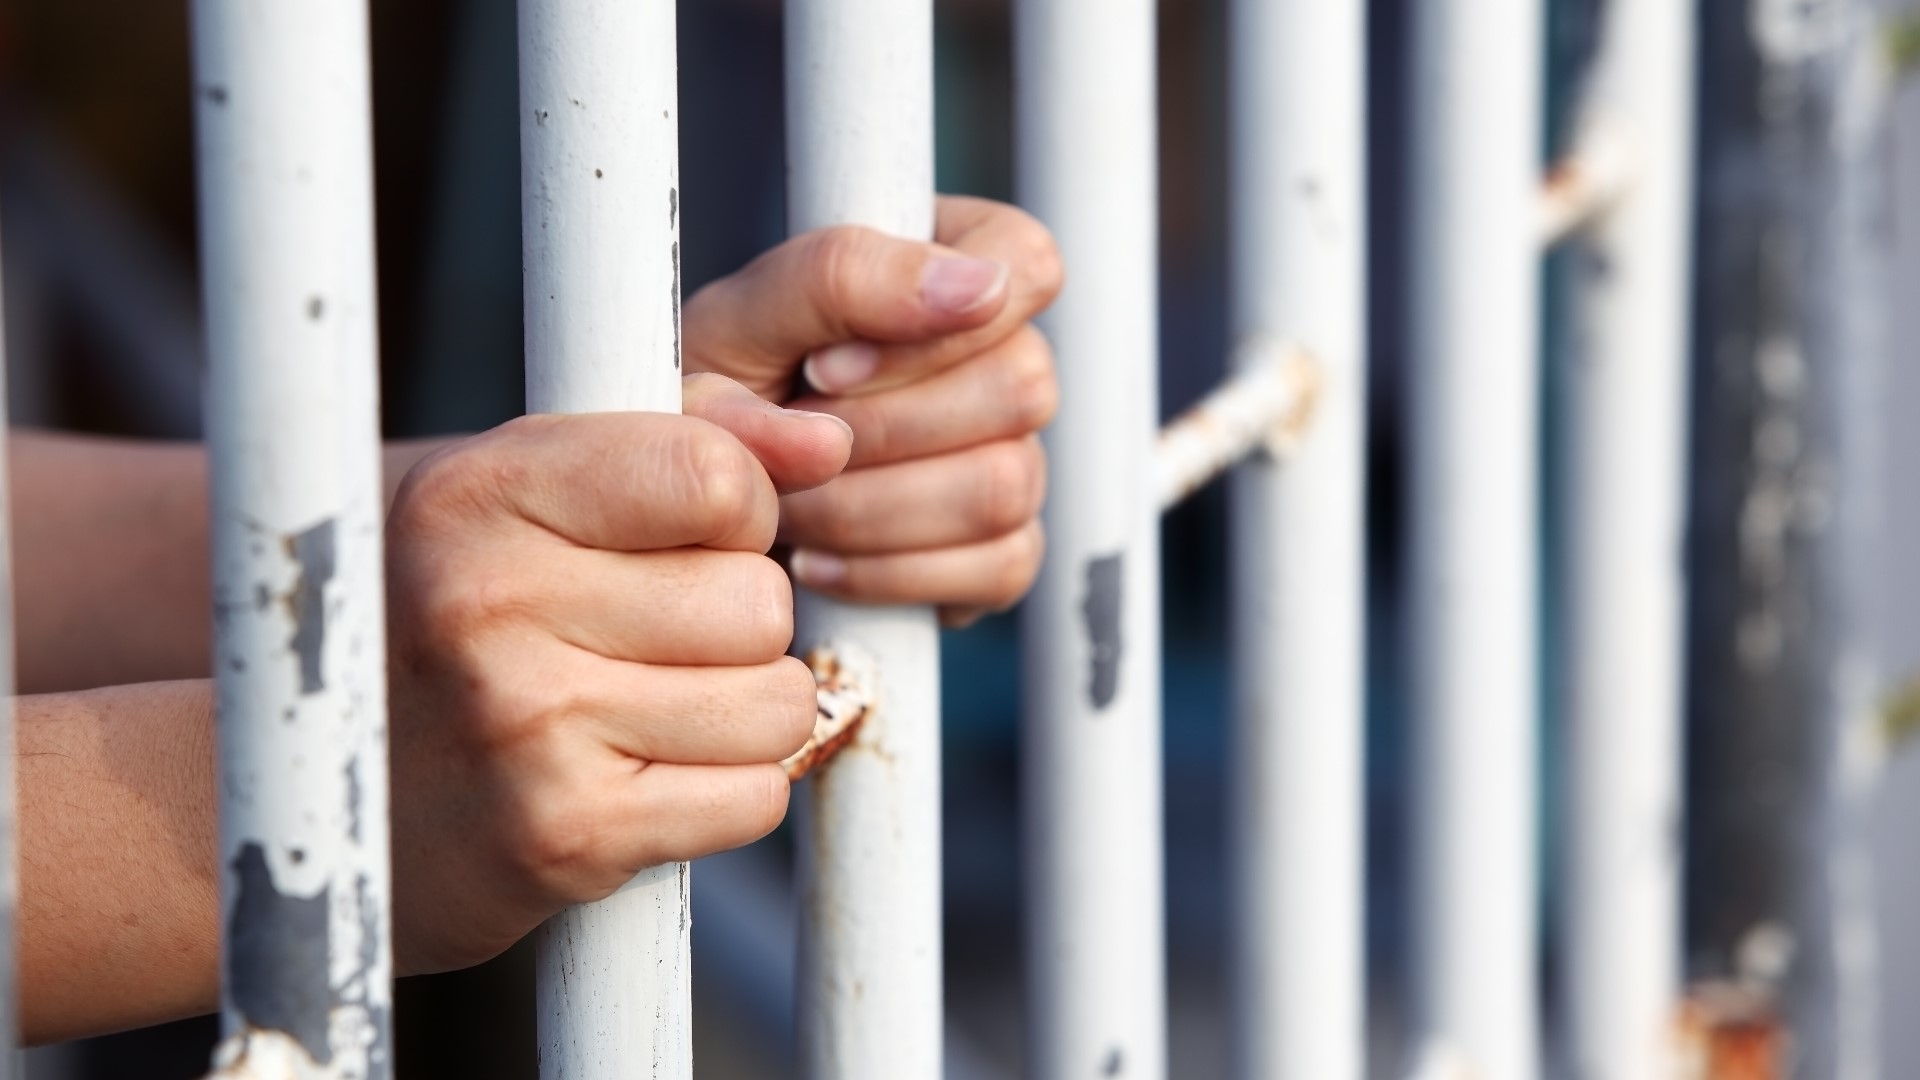 The study by the state's Gender and Justice Commission found that women of color often face longer prison sentences than their white counterparts.